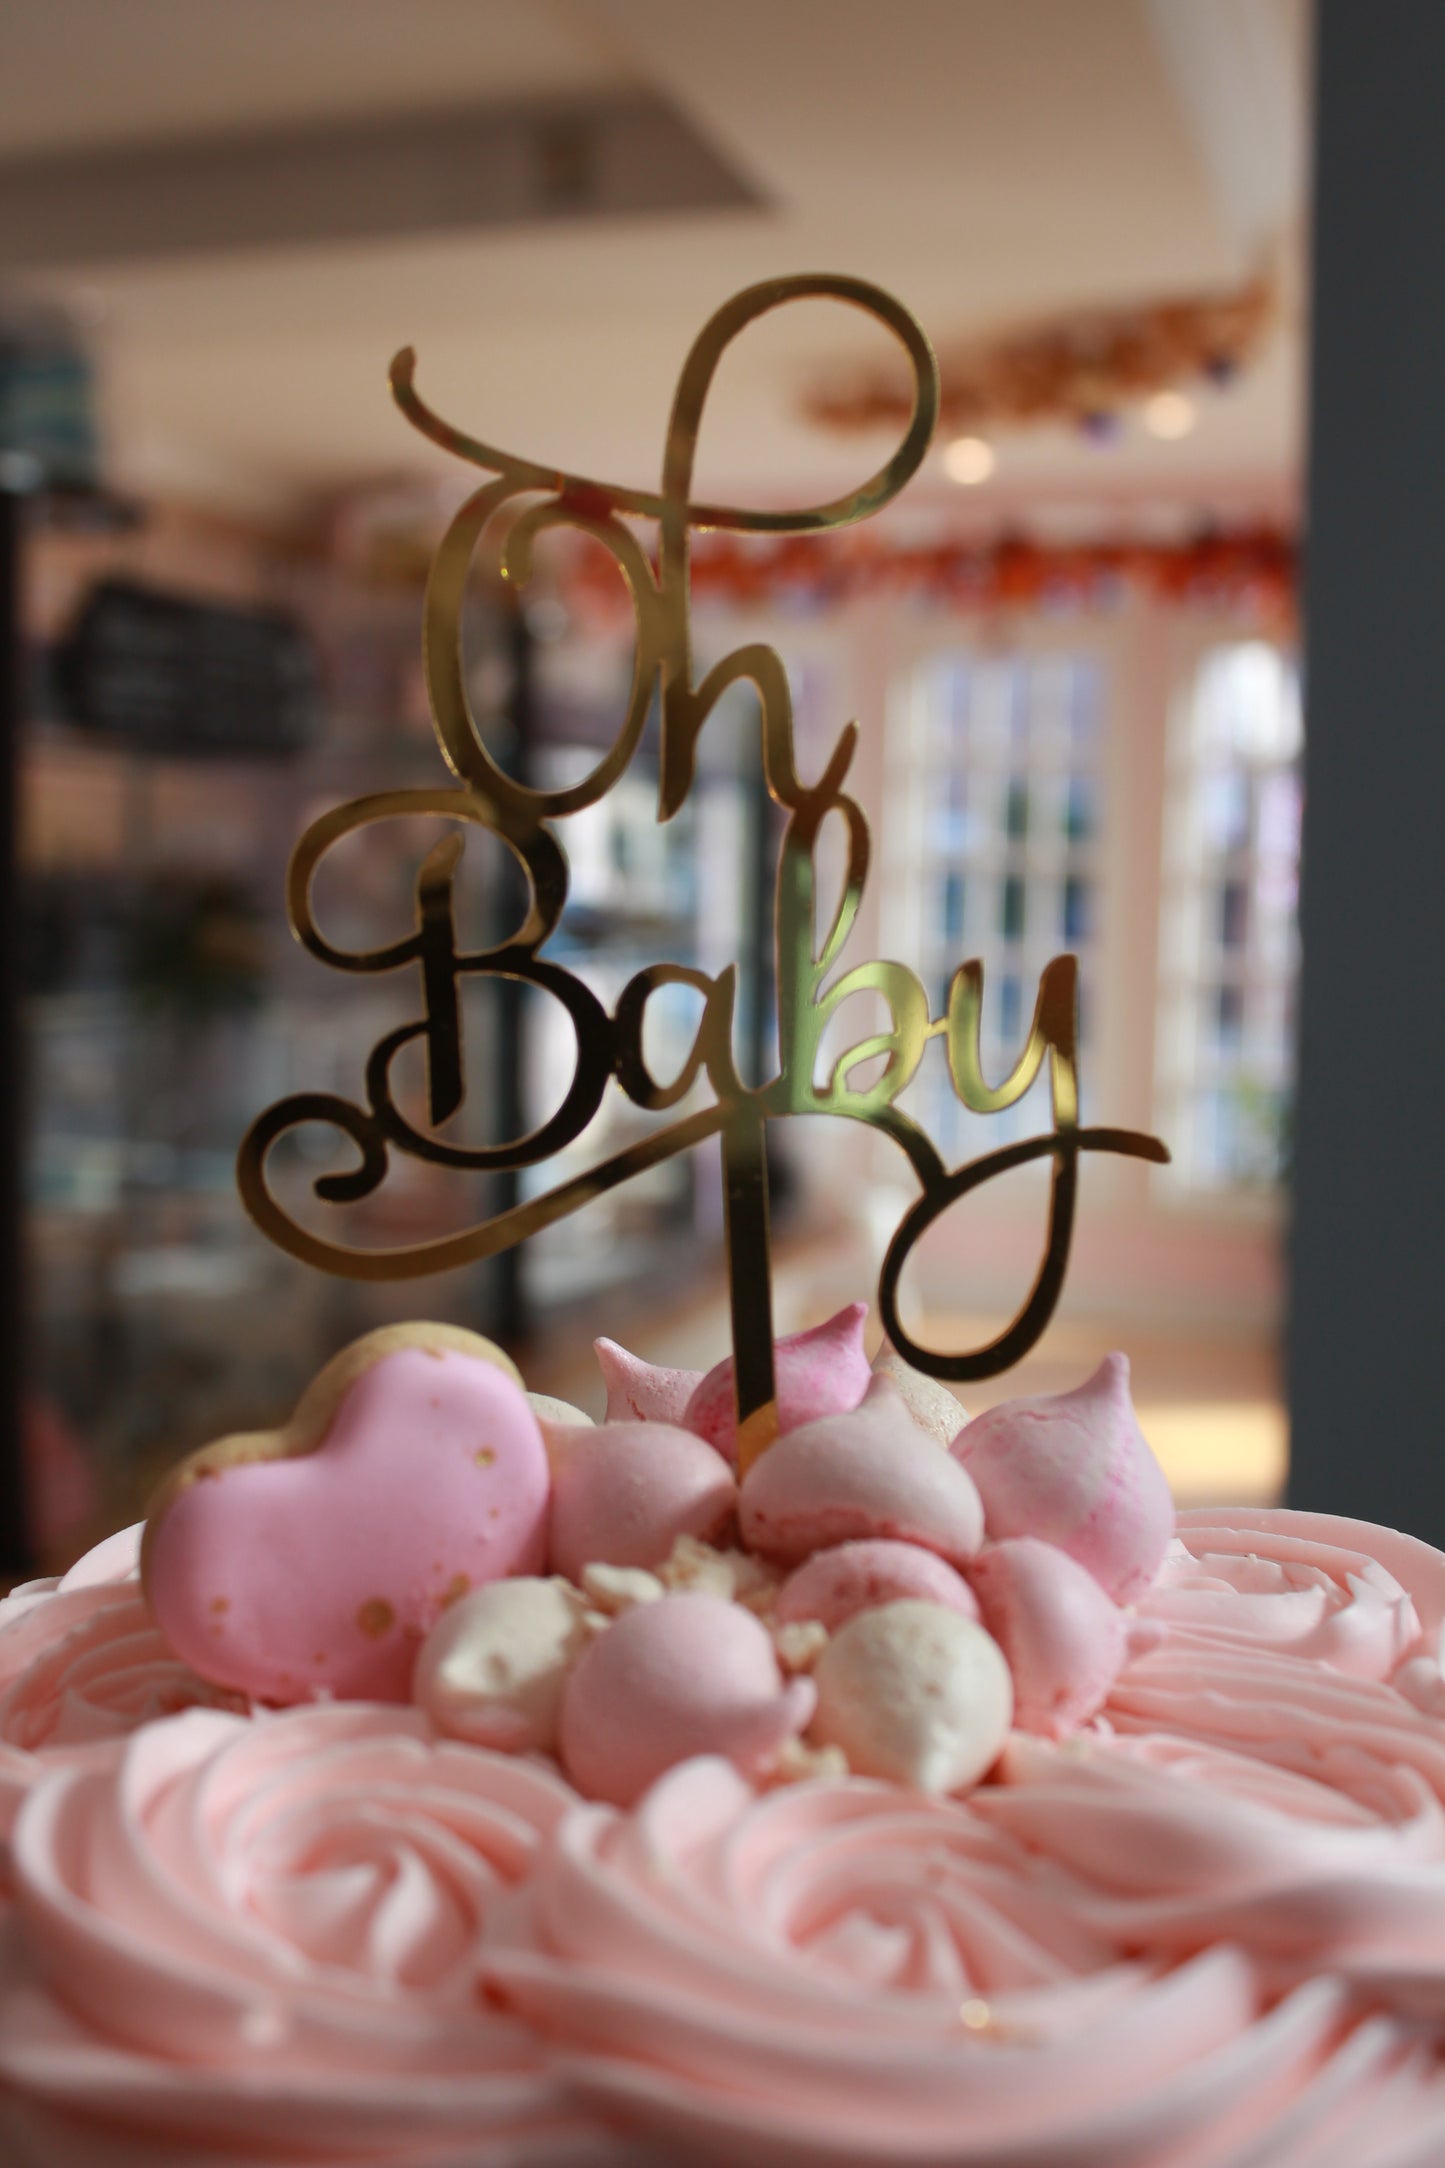 "Oh Baby" Cake Toppers